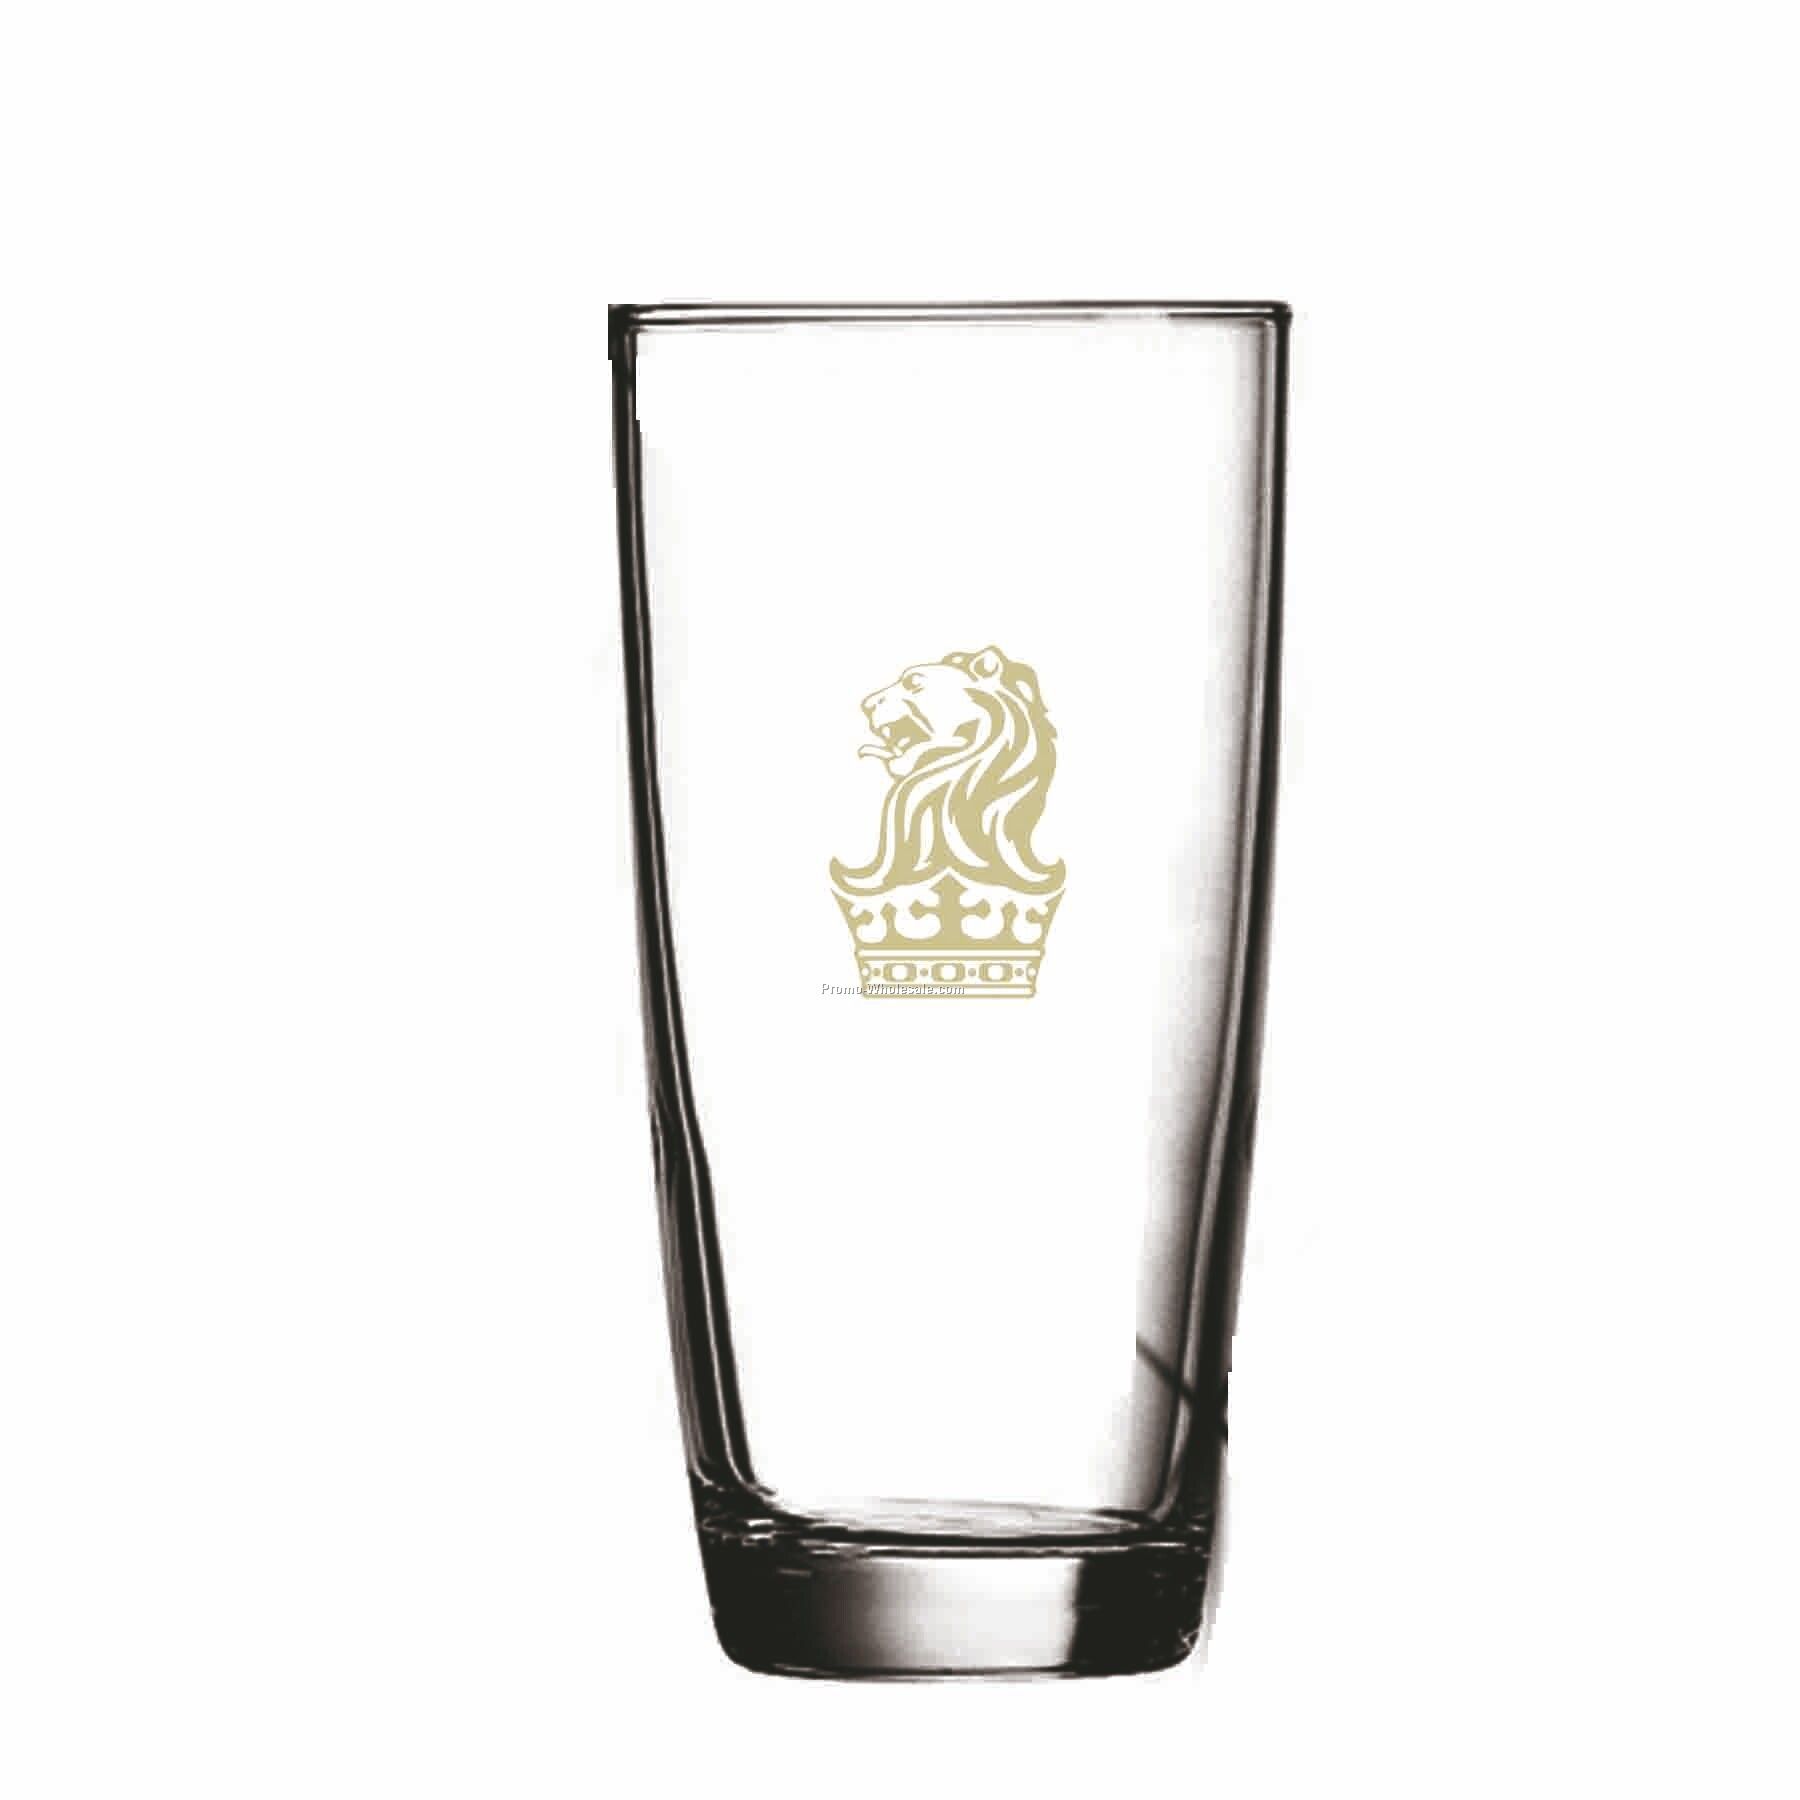 16 Oz. Hi-ball/ Old Fashioned Glass W/ Curved Sides (Printed)